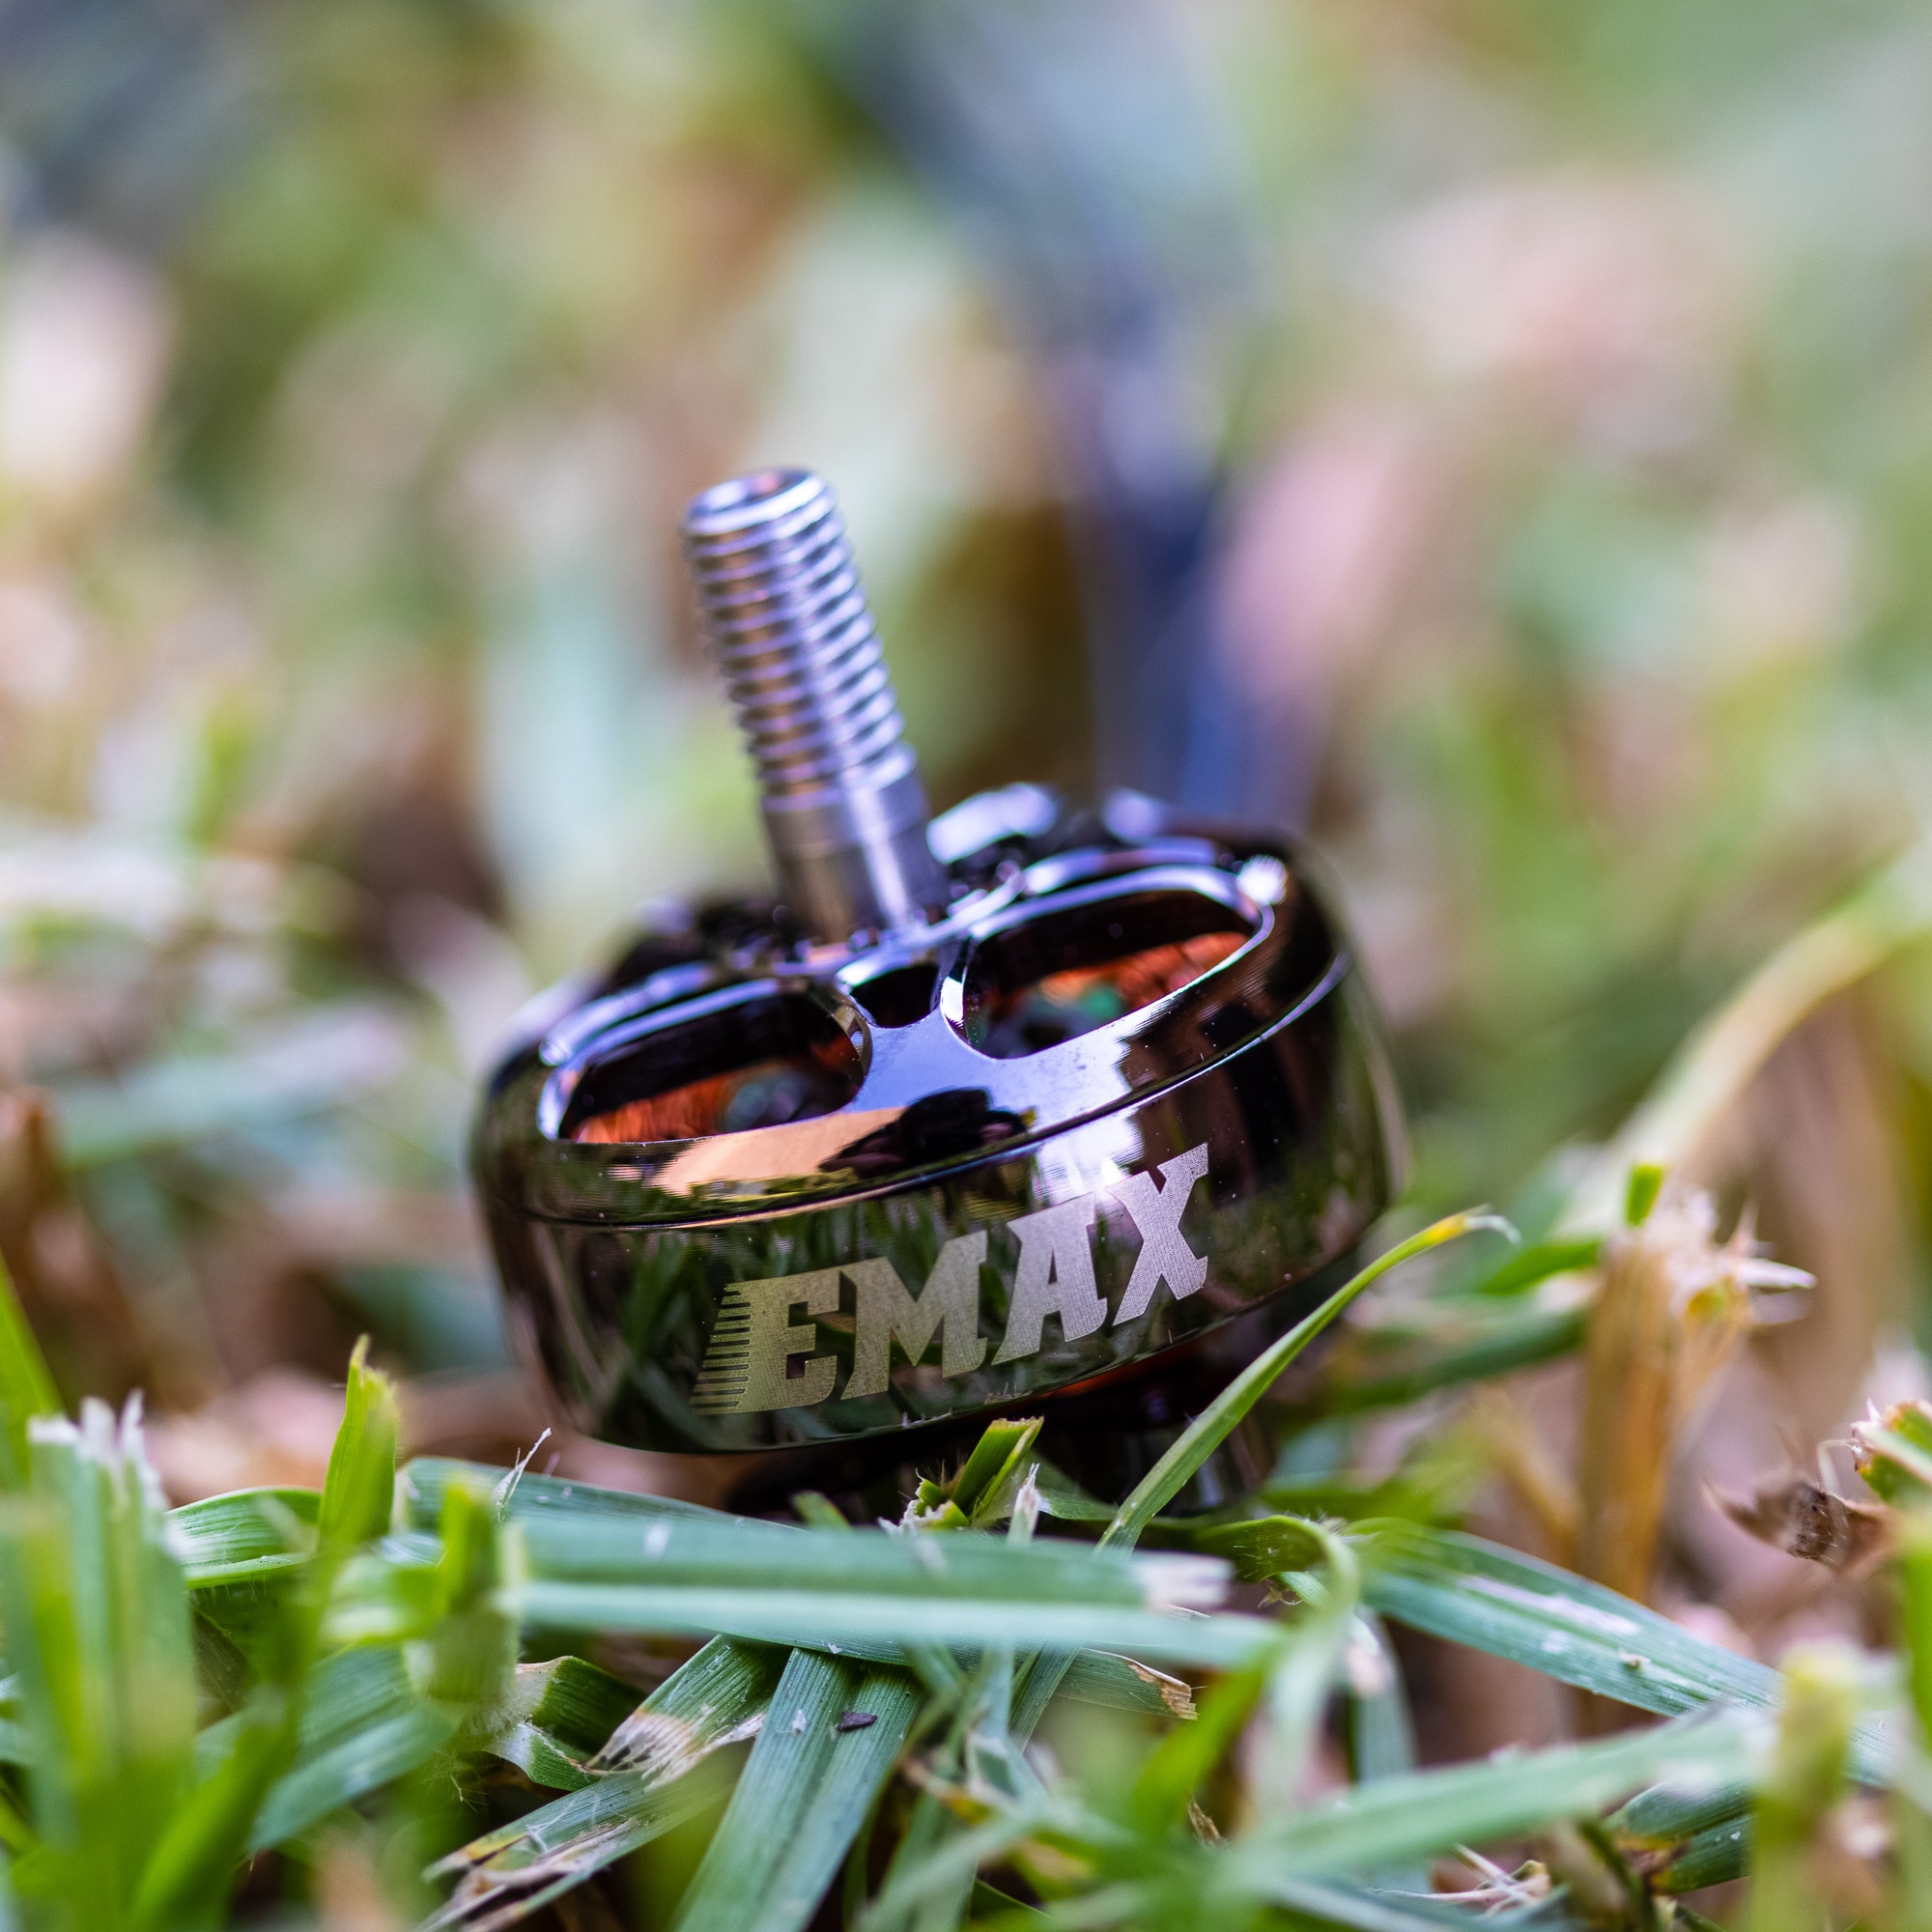 Emax Official ECO II Brushless Motor for Drones